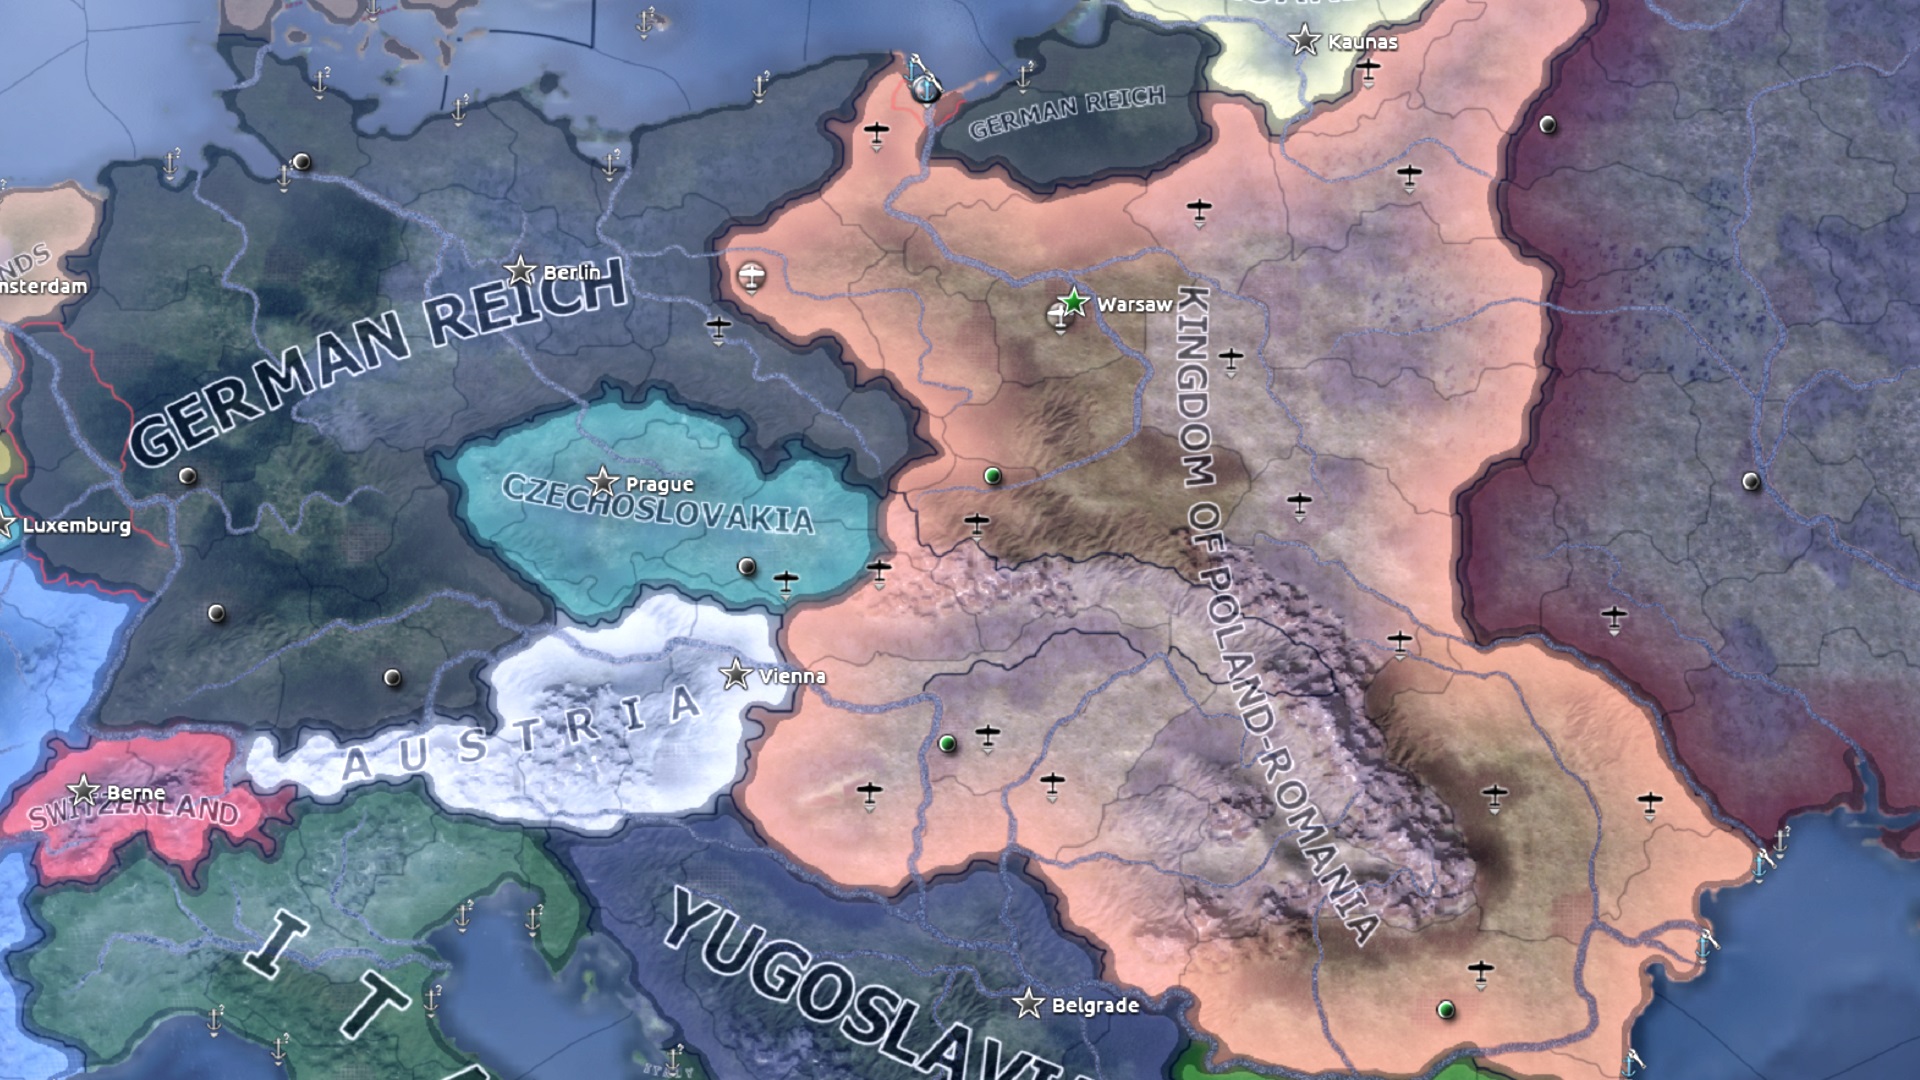 Hearts of Iron IV’s AI is so good, the devs sometimes need to handicap it via code